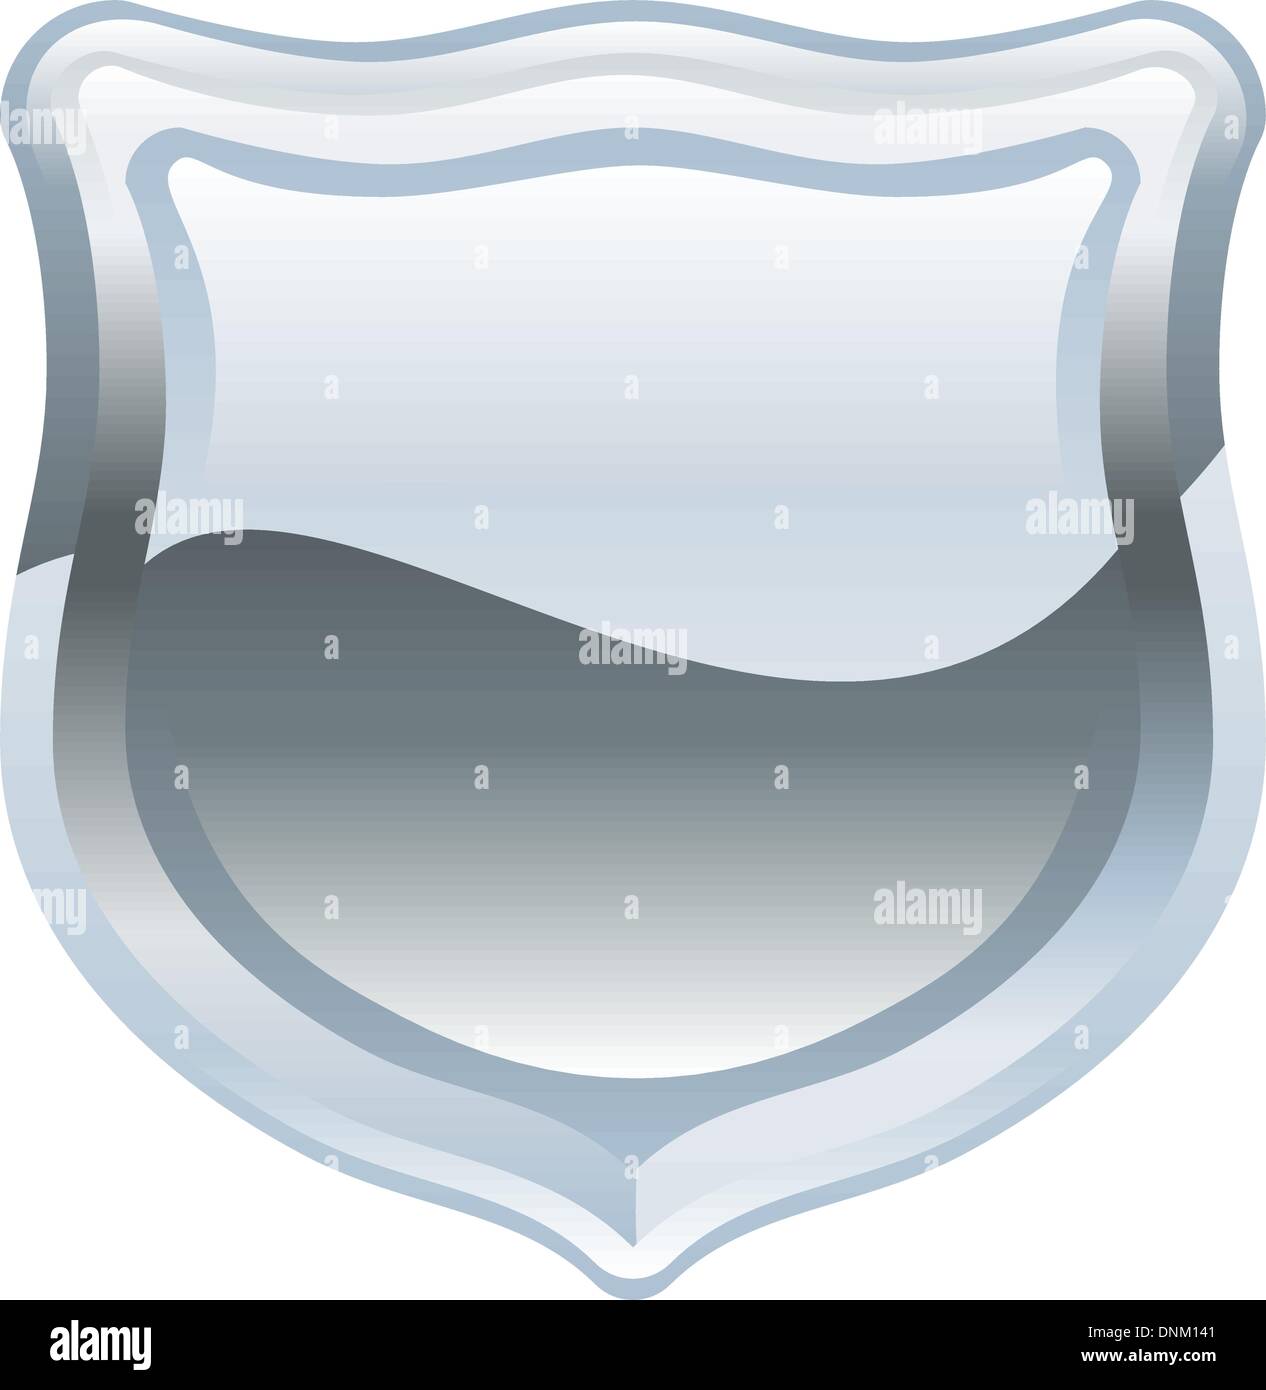 Illustration of a silver shield Stock Vector